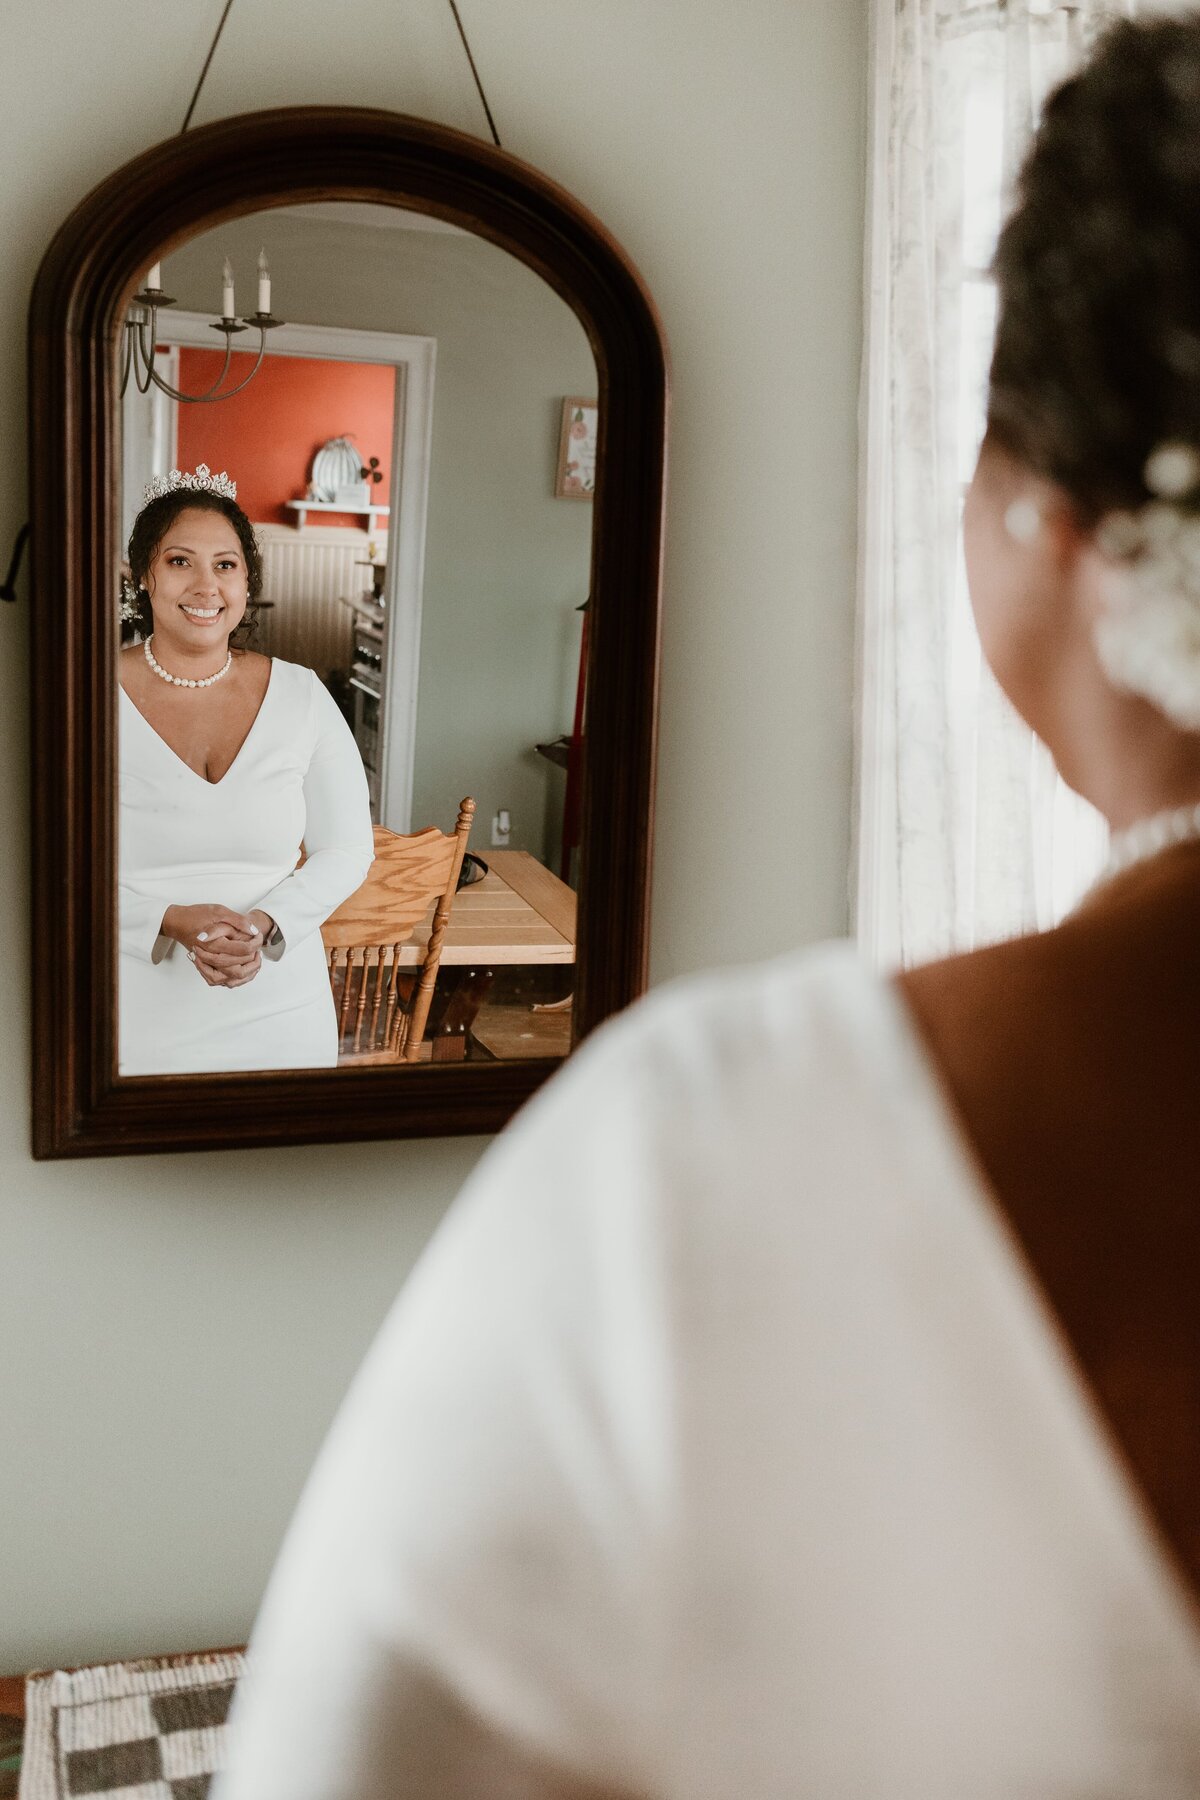 Bride in a white gown with a tiara smiles as she looks at her reflection in a vintage arched mirror, with the cozy interior of a room subtly reflected behind her.